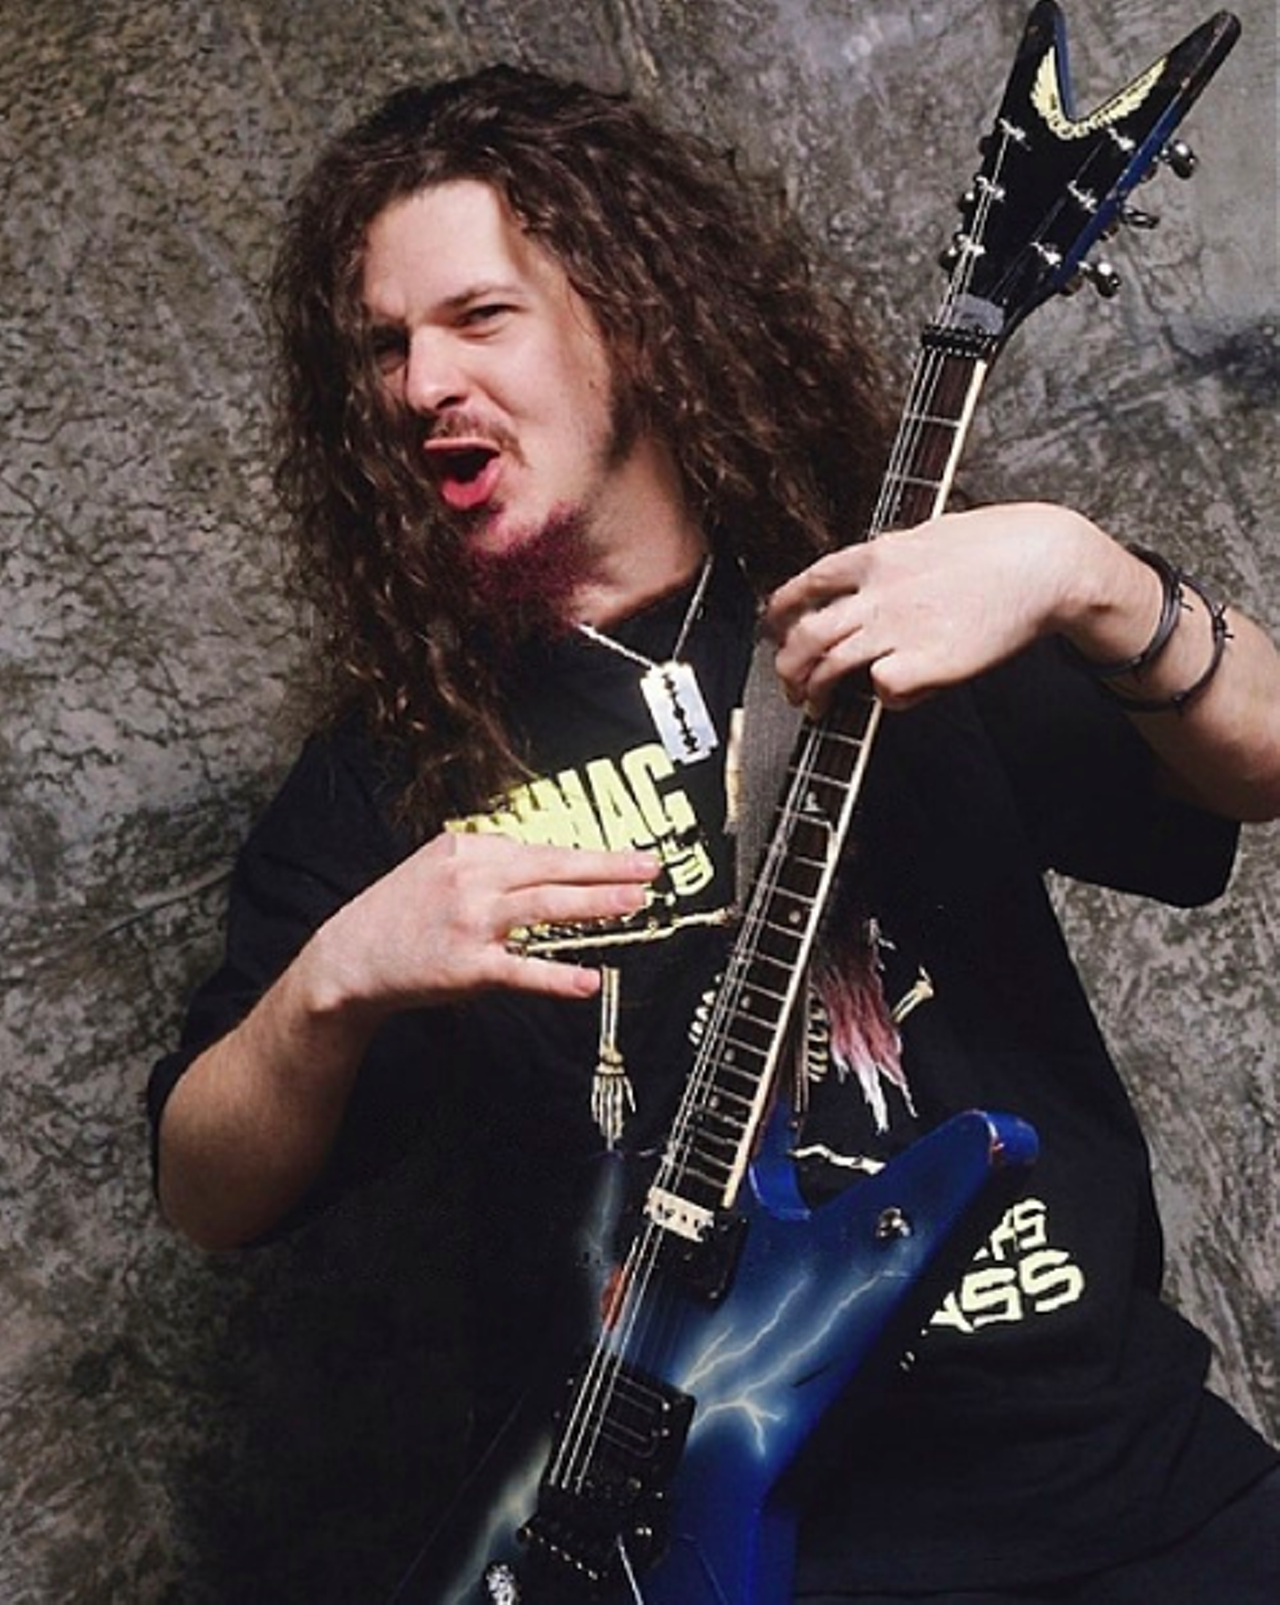 Darrell Lance “Dimebag” Abbott
The famous Dimebag Darrell from heavy metal bands Pantera and Damageplan is buried in Moore Gardens Memorial Cemetery in Arlington after being gunned down during a concert in 2004. A gunman burst into the venue and began shooting, striking the beloved musician. Legend has it that he was buried in an officially licensed KISS-themed casket. Pantera had an extremely successful musical career from their launch in the ‘80s all the way up to the early aughts.
Photo via Instagram / dimebagdarrell